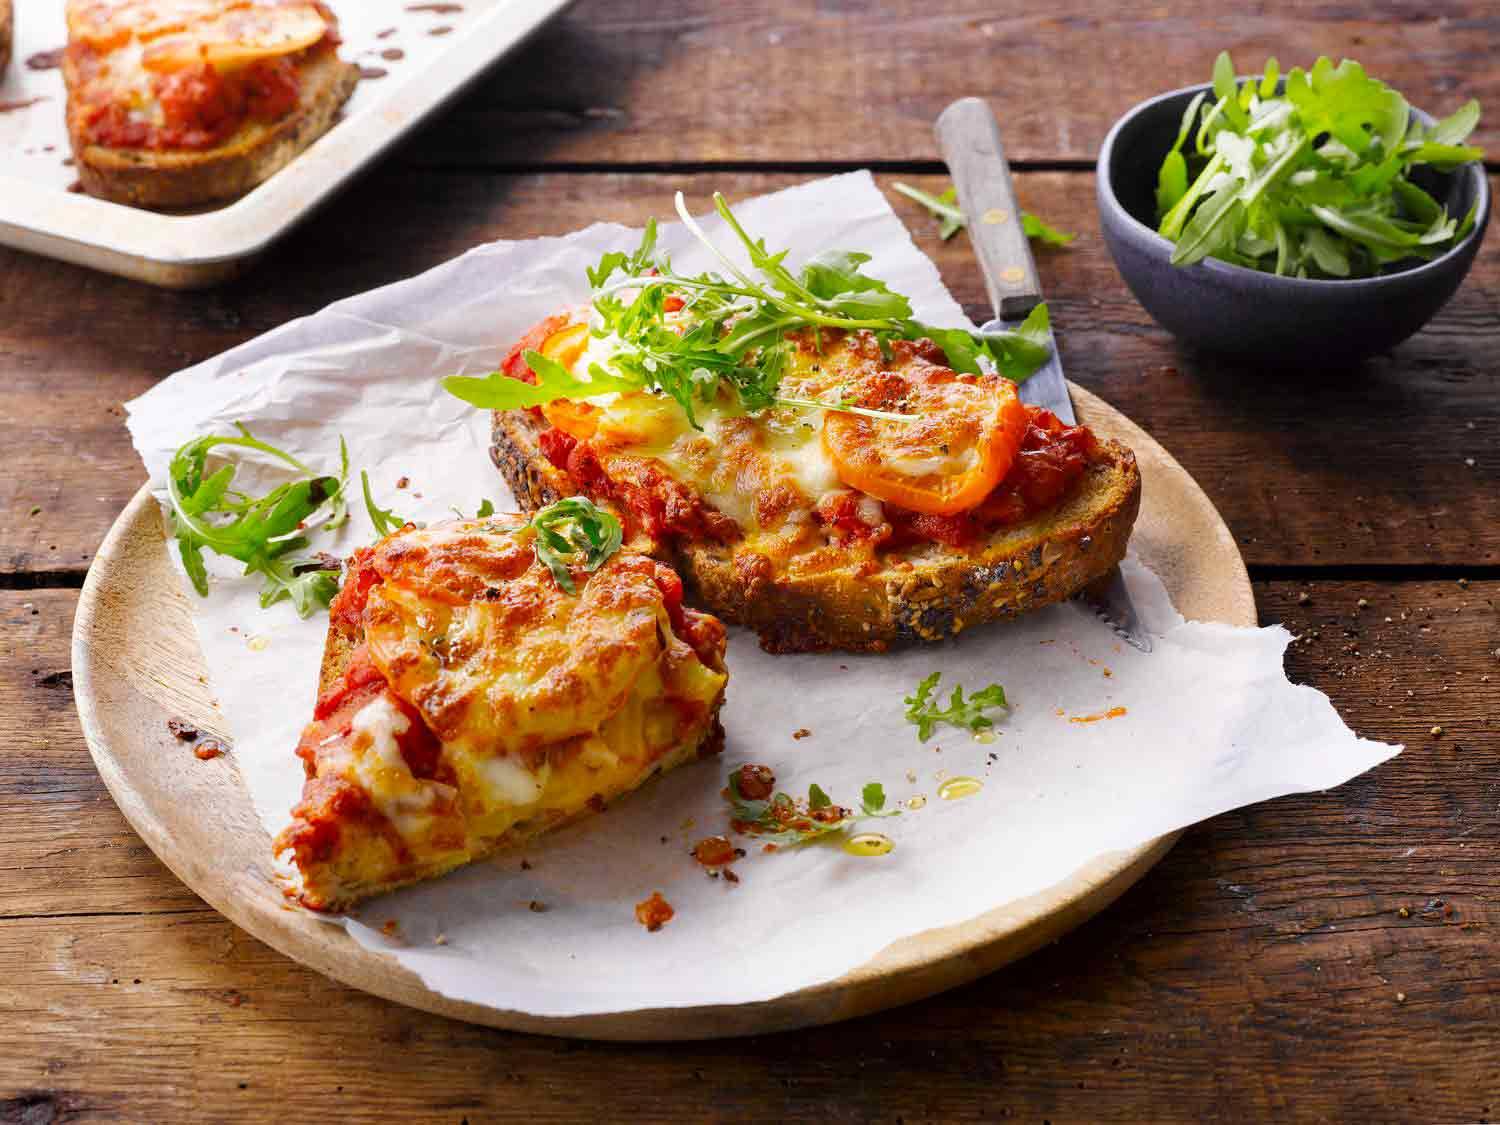 Margherita Pizza Breads with Rocket